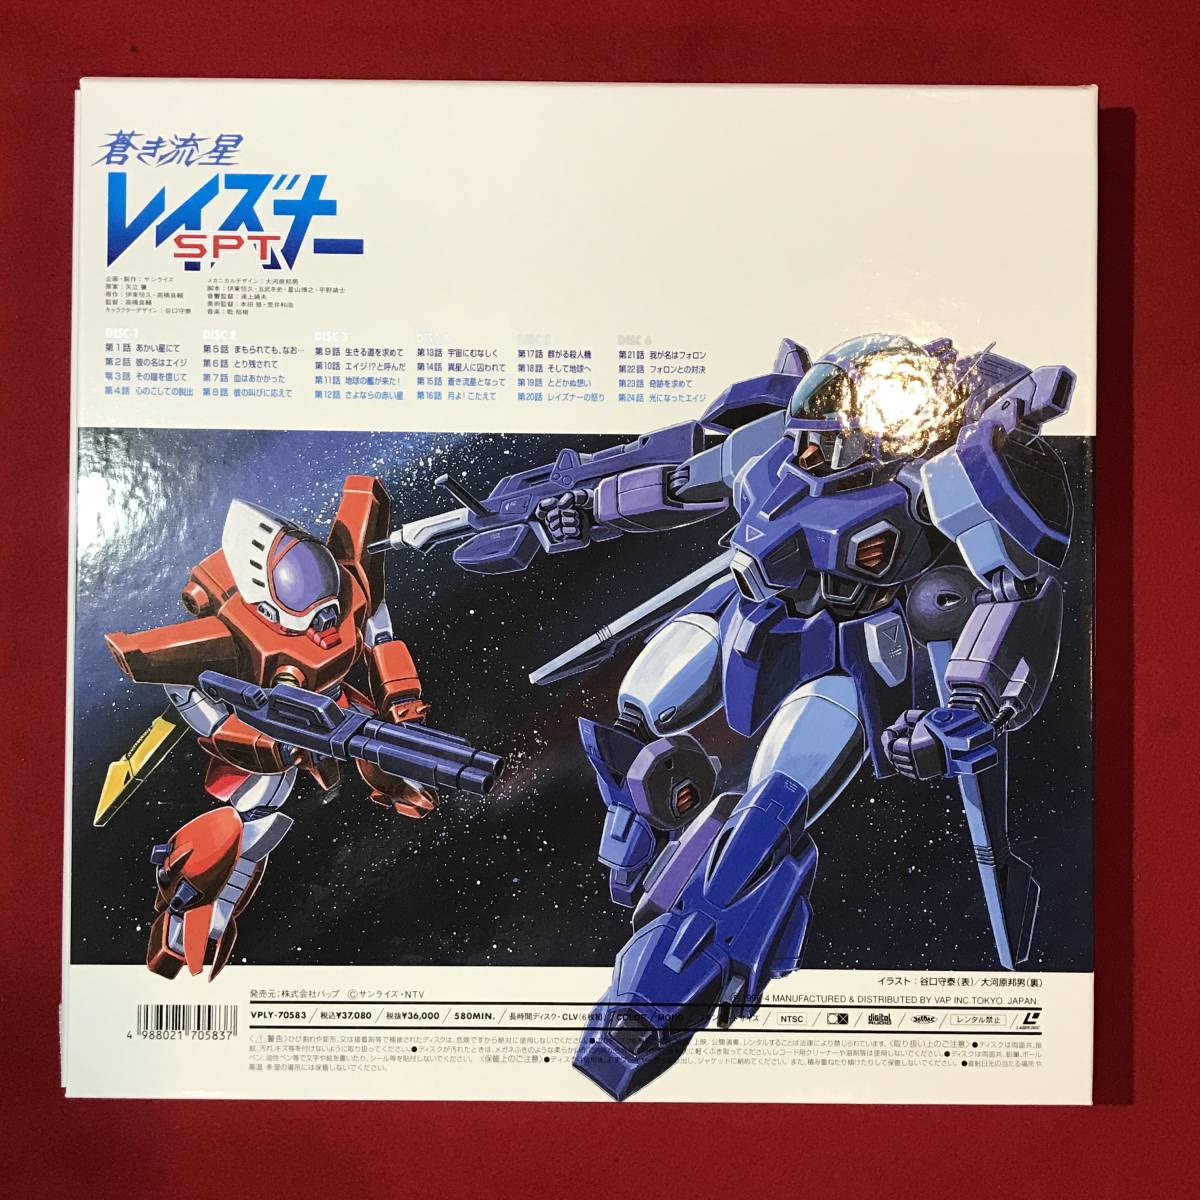 A3979*LD-BOX/ laser disk * Blue Comet Layzner /LAYZNER SPT 6 pieces set EIJI MEMORIAL 1996 regular price 37080 jpy manual small scratch equipped 